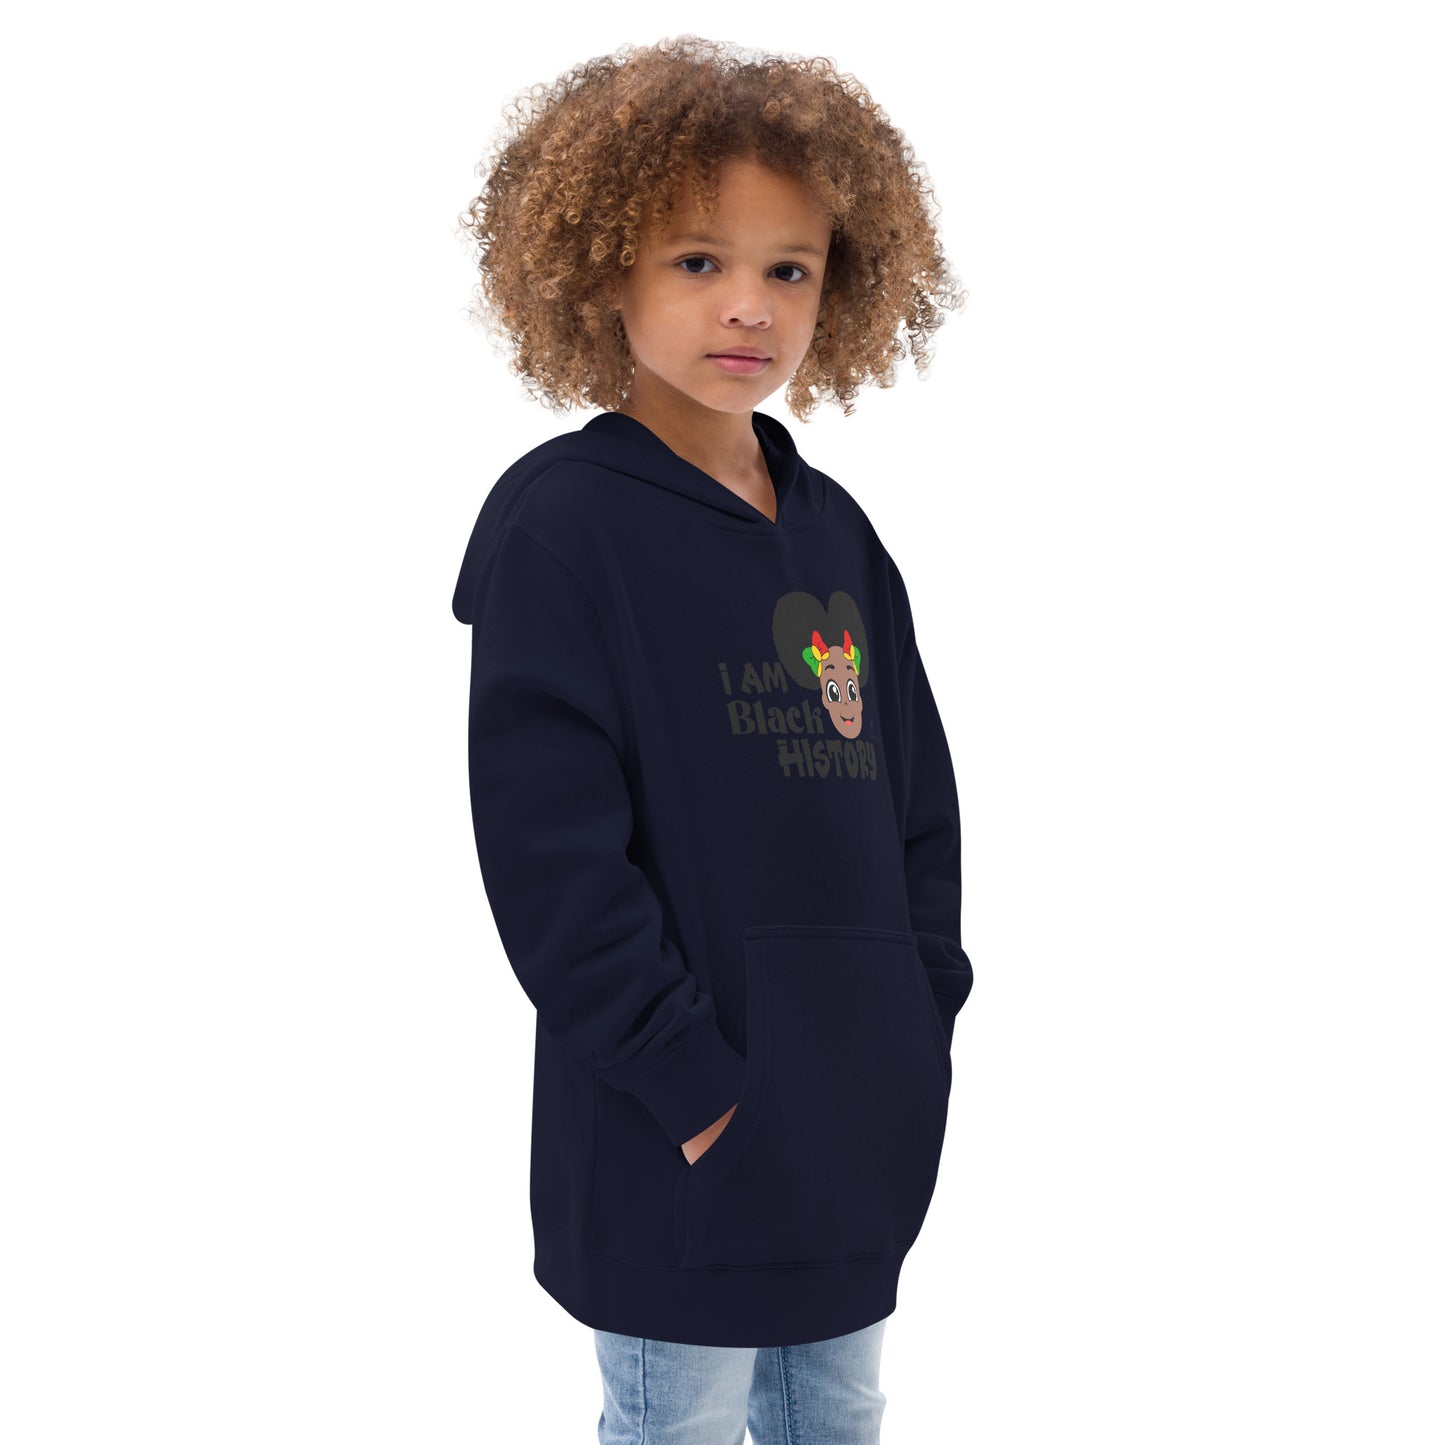 Kids fleece hoodie - I Am Black History (Girl with Afro Puffs)